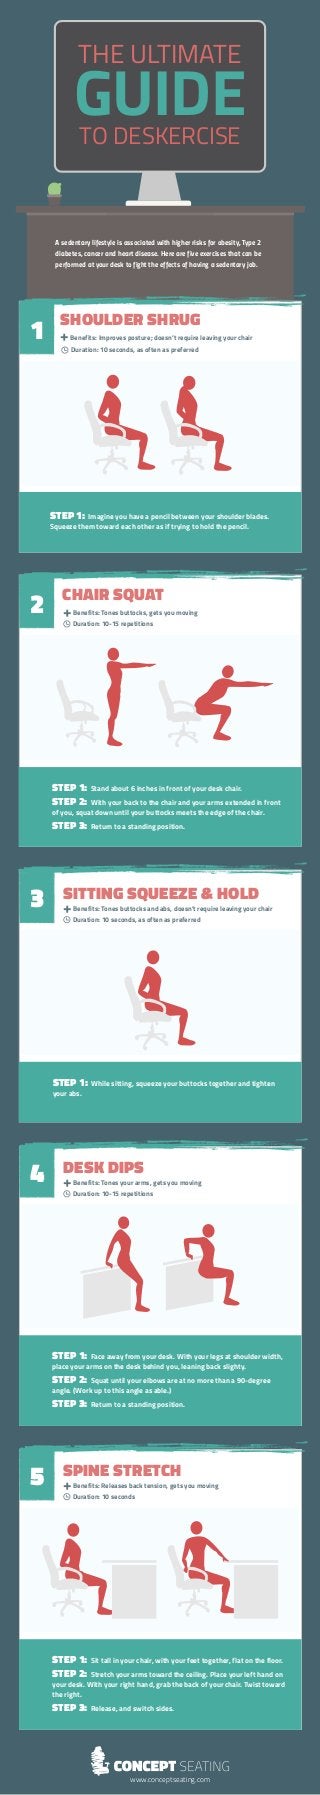 THE ULTIMATE
GUIDETO DESKERCISE
1
2
3
A sedentary lifestyle is associated with higher risks for obesity, Type 2
diabetes, cancer and heart disease. Here are five exercises that can be
performed at your desk to fight the effects of having a sedentary job.
STEP 1: Imagine you have a pencil between your shoulder blades.
Squeeze them toward each other as if trying to hold the pencil.
STEP 1: Stand about 6 inches in front of your desk chair.
STEP 2: With your back to the chair and your arms extended in front
of you, squat down until your buttocks meets the edge of the chair.
STEP 3: Return to a standing position.
STEP 1: Face away from your desk. With your legs at shoulder width,
place your arms on the desk behind you, leaning back slighty.
STEP 2: Squat until your elbows are at no more than a 90-degree
angle. (Work up to this angle as able.)
STEP 3: Return to a standing position.
STEP 1: Sit tall in your chair, with your feet together, flat on the floor.
STEP 2: Stretch your arms toward the ceiling. Place your left hand on
your desk. With your right hand, grab the back of your chair. Twist toward
the right.
STEP 3: Release, and switch sides.
+Benefits: Improves posture; doesn’t require leaving your chair
Duration: 10 seconds, as often as preferred
+Benefits: Tones buttocks, gets you moving
	 Duration: 10-15 repetitions
SITTING SQUEEZE & HOLD
+Benefits: Tones buttocks and abs, doesn’t require leaving your chair
	 Duration: 10 seconds, as often as preferred
SHOULDER SHRUG
CHAIR SQUAT	
4
5
DESK DIPS
+Benefits: Tones your arms, gets you moving
	 Duration: 10-15 repetitions
SPINE STRETCH
+Benefits: Releases back tension, gets you moving
	 Duration: 10 seconds
STEP 1: While sitting, squeeze your buttocks together and tighten
your abs.
www.conceptseating.com
 